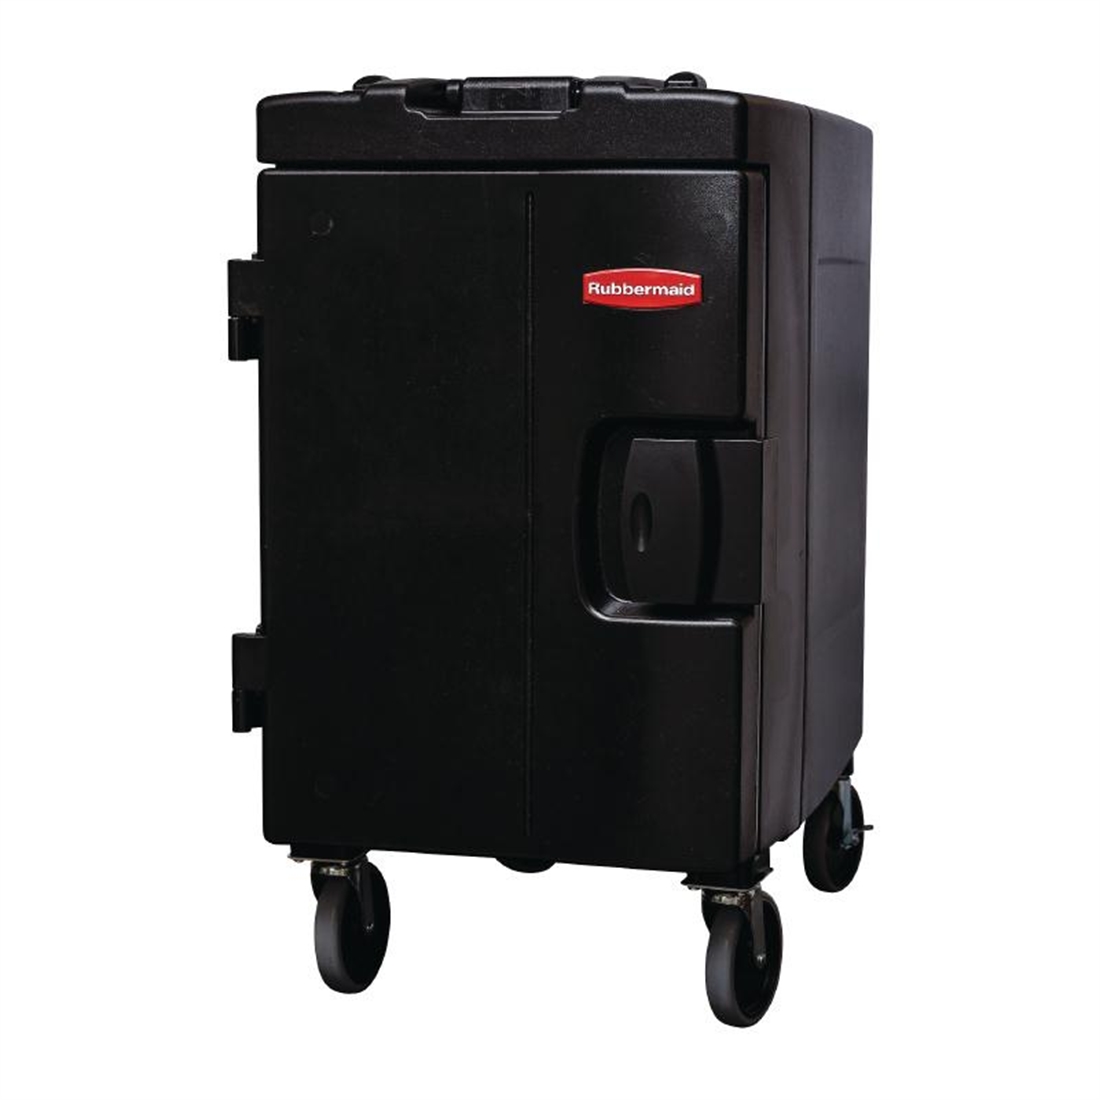 Rubbermaid Catermax 100 Insulated Food Storage Unit Black with Wheels